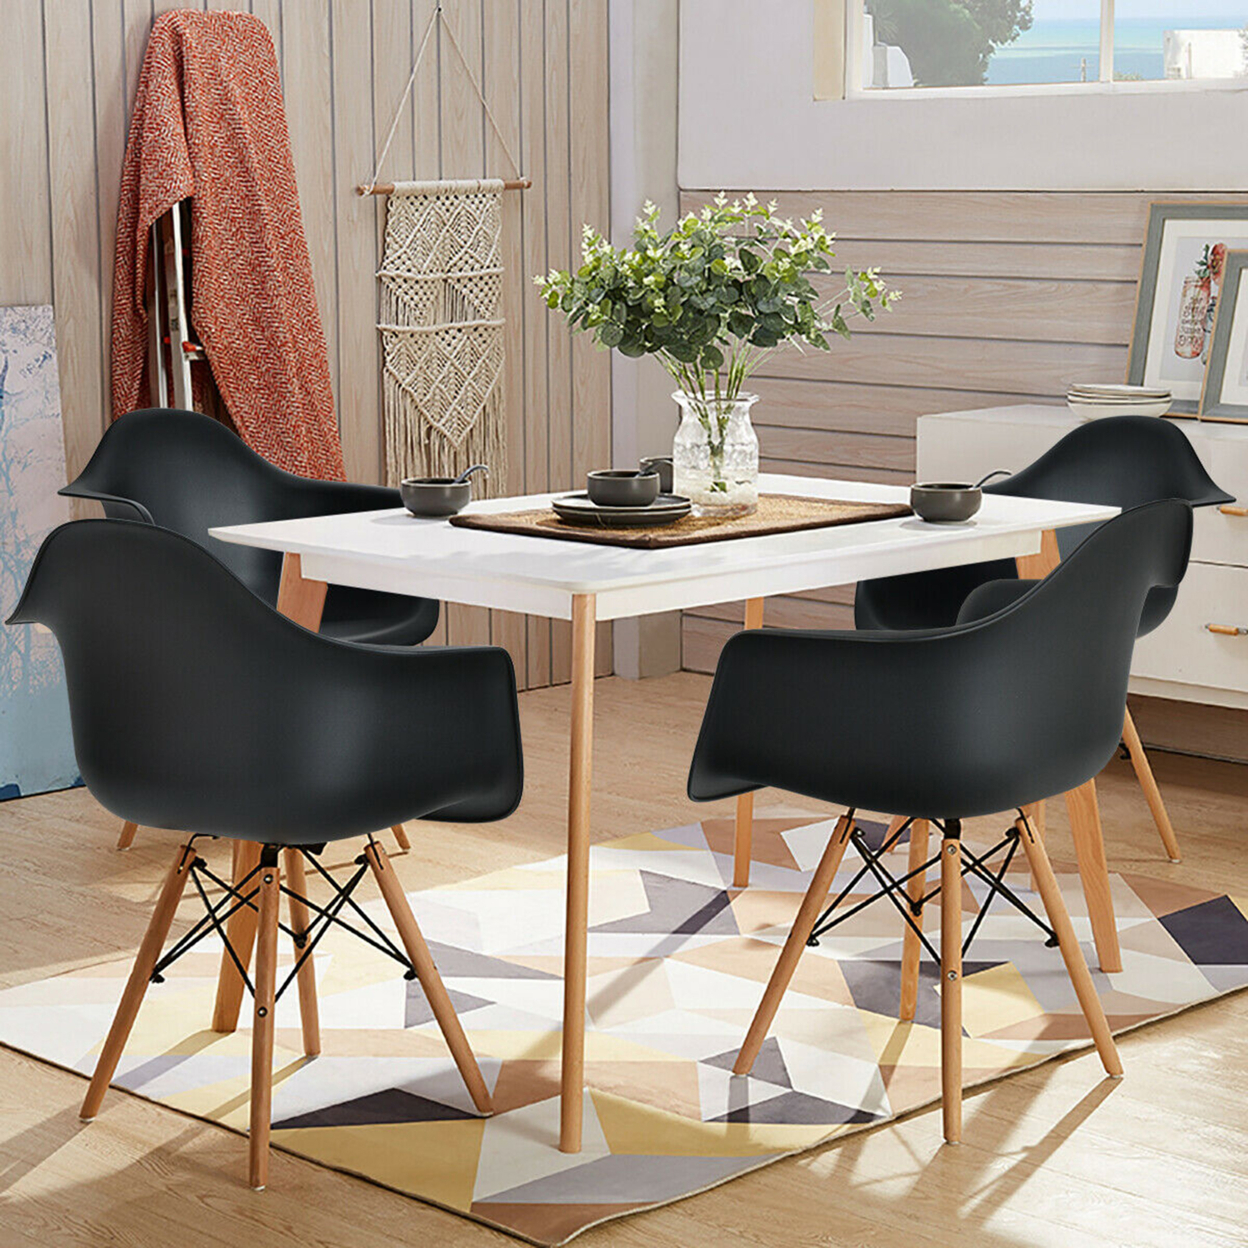 4PCS Molded Dining Arm Chair Side Chair Home Kitchen W/ Wooden Legs Black